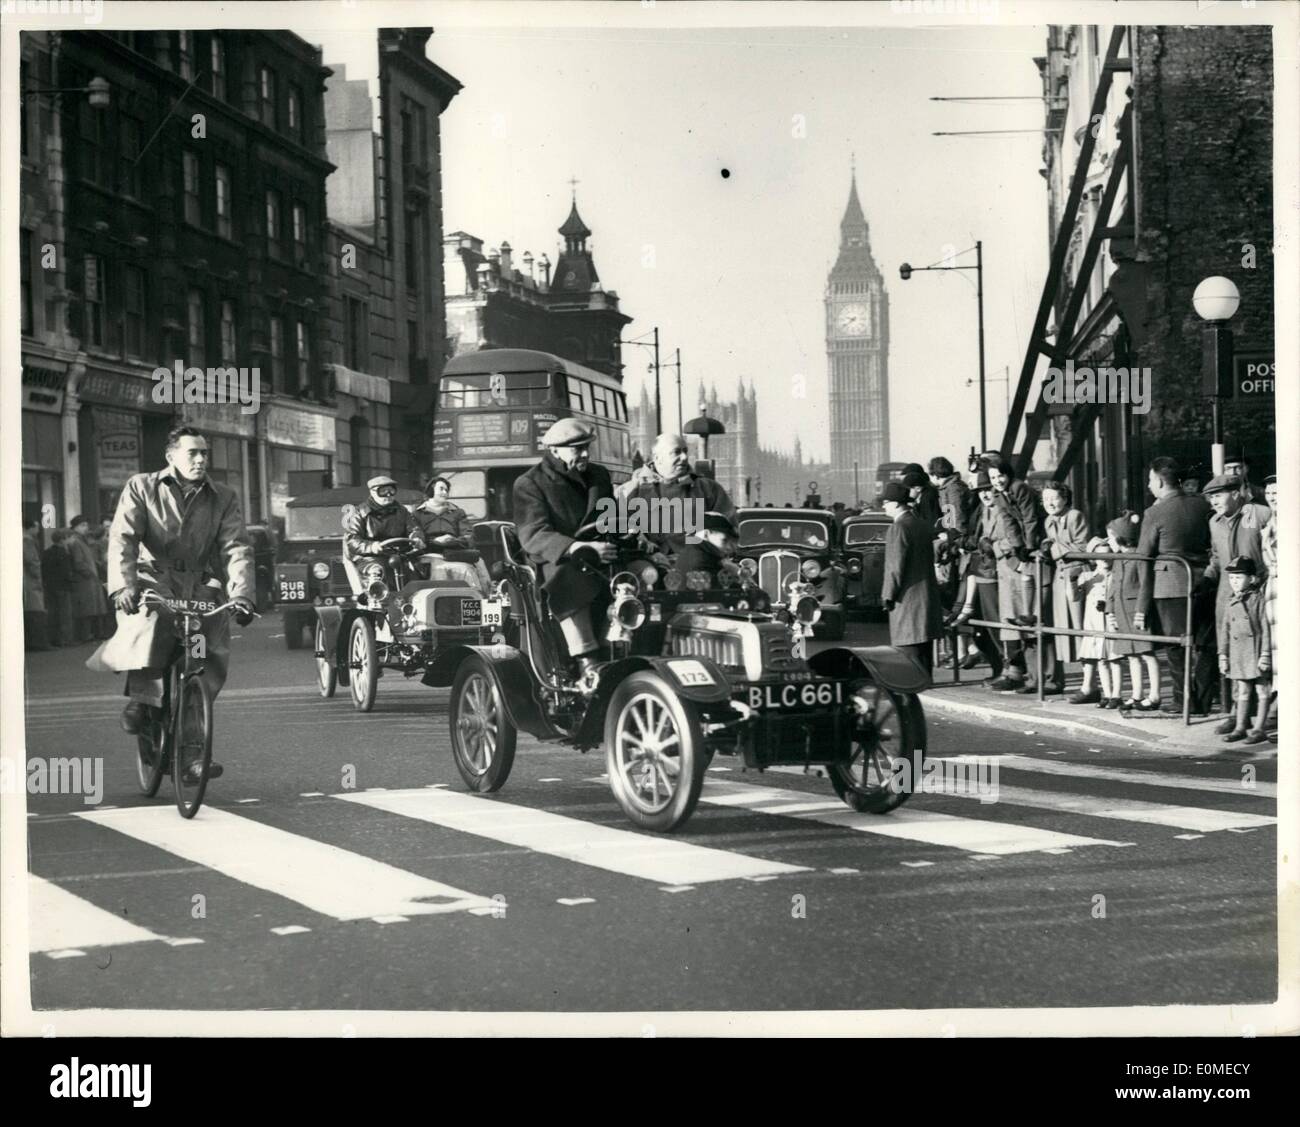 Nov. 11, 1954 - London To Brighton Veteran Car Run. The Royal Automobile Club Veteran Car Run from London to Brighton took place today. The Run. organised by the Royal Automobile Club in conjunction with the Veteran Car Club of Great Britain, started this morning from Hyde Park. Keystone Photo Shows:- A 1904 Dedion Bouton, followed by a 1904 Pope-Tribune, seen cornering after crossing Westminster Bridge. Stock Photo